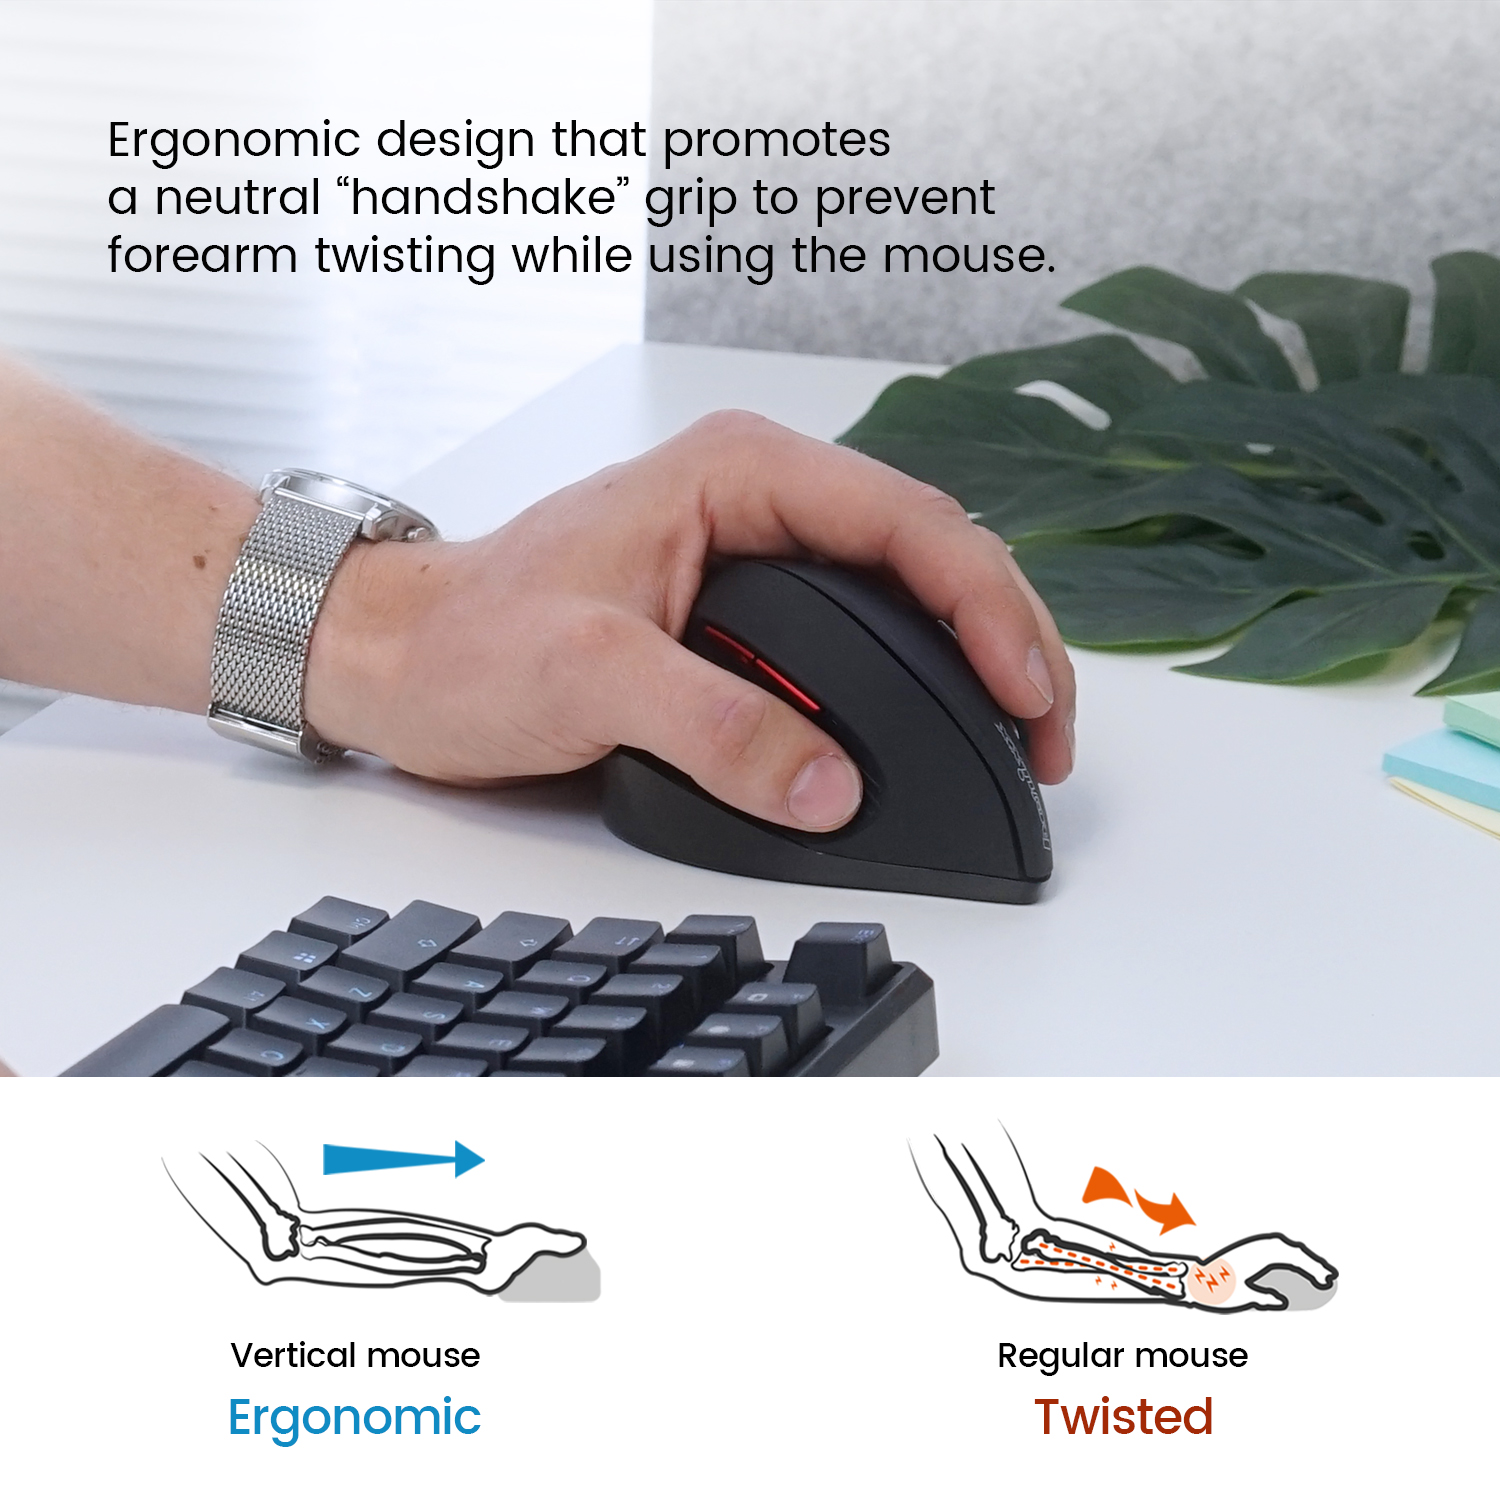 PERIMICE-718 The True Ergonomic Mouse for Left-Handed Users